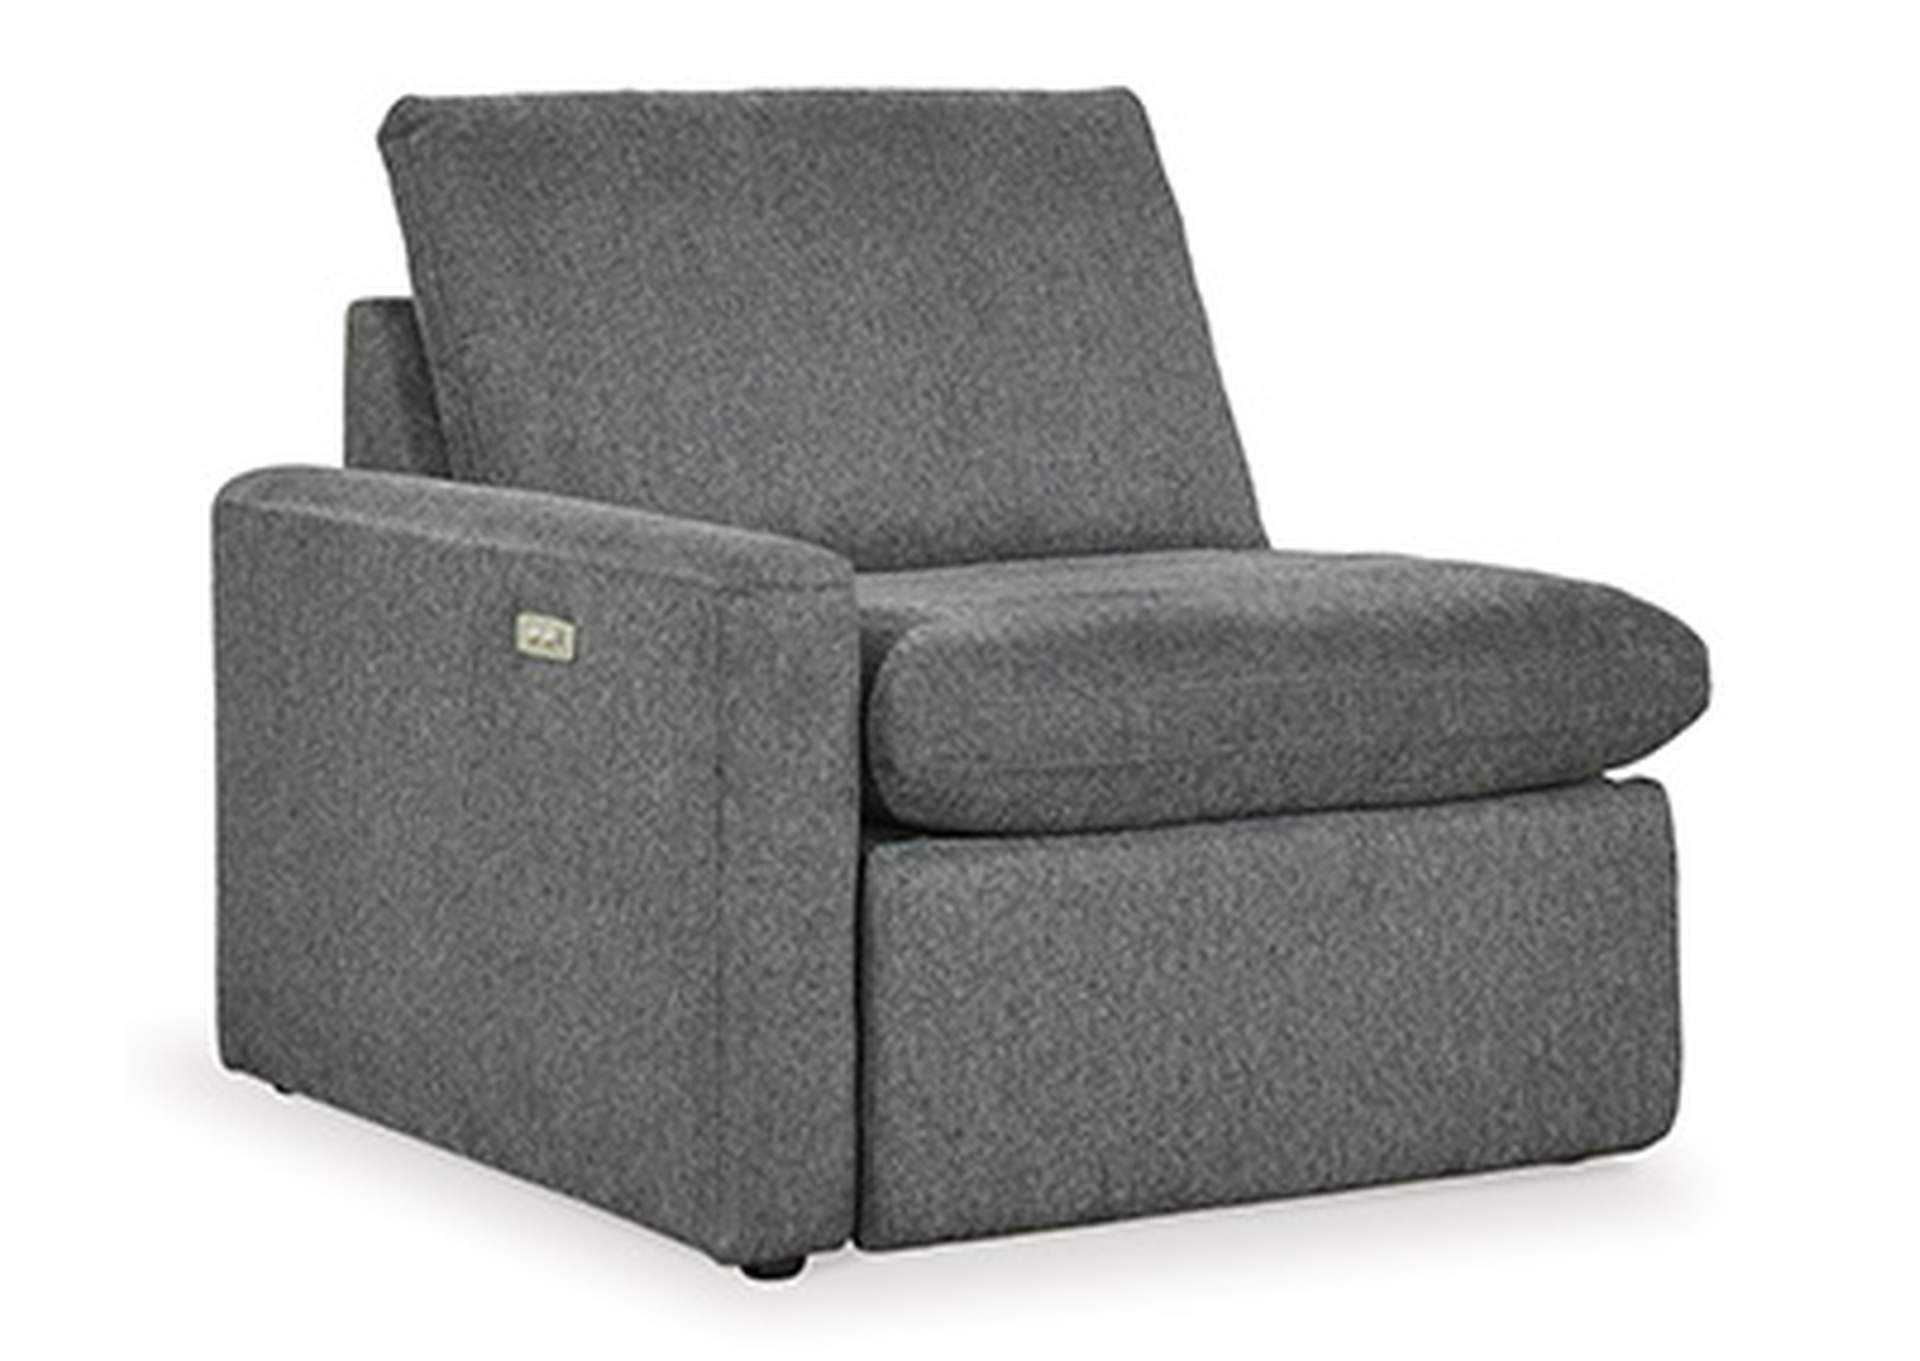 Hartsdale Left-Arm Facing Power Recliner,Signature Design By Ashley